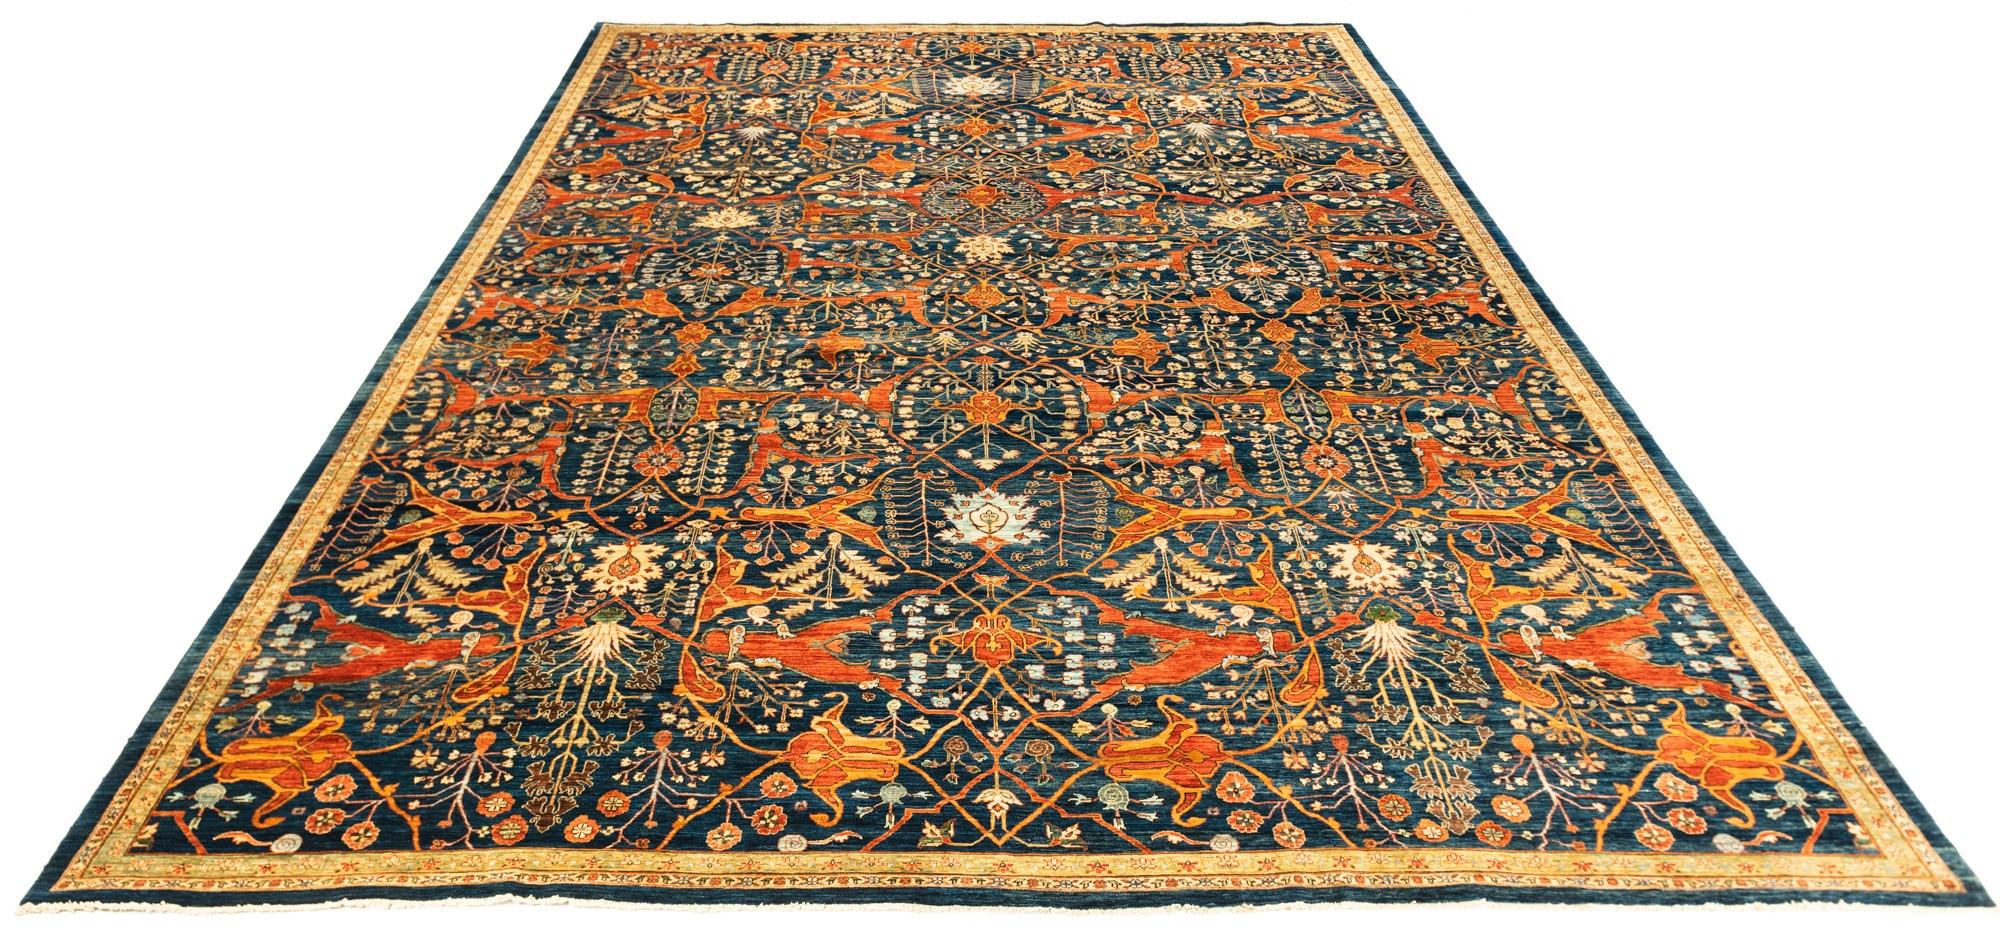 This large carpet takes its design from traditional arabesque motif Kurdish Bidjar carpets from Persia. The rich color palette and unusually narrow border make for an excellent modern take on a traditional style. Handwoven in northern Afghanistan by